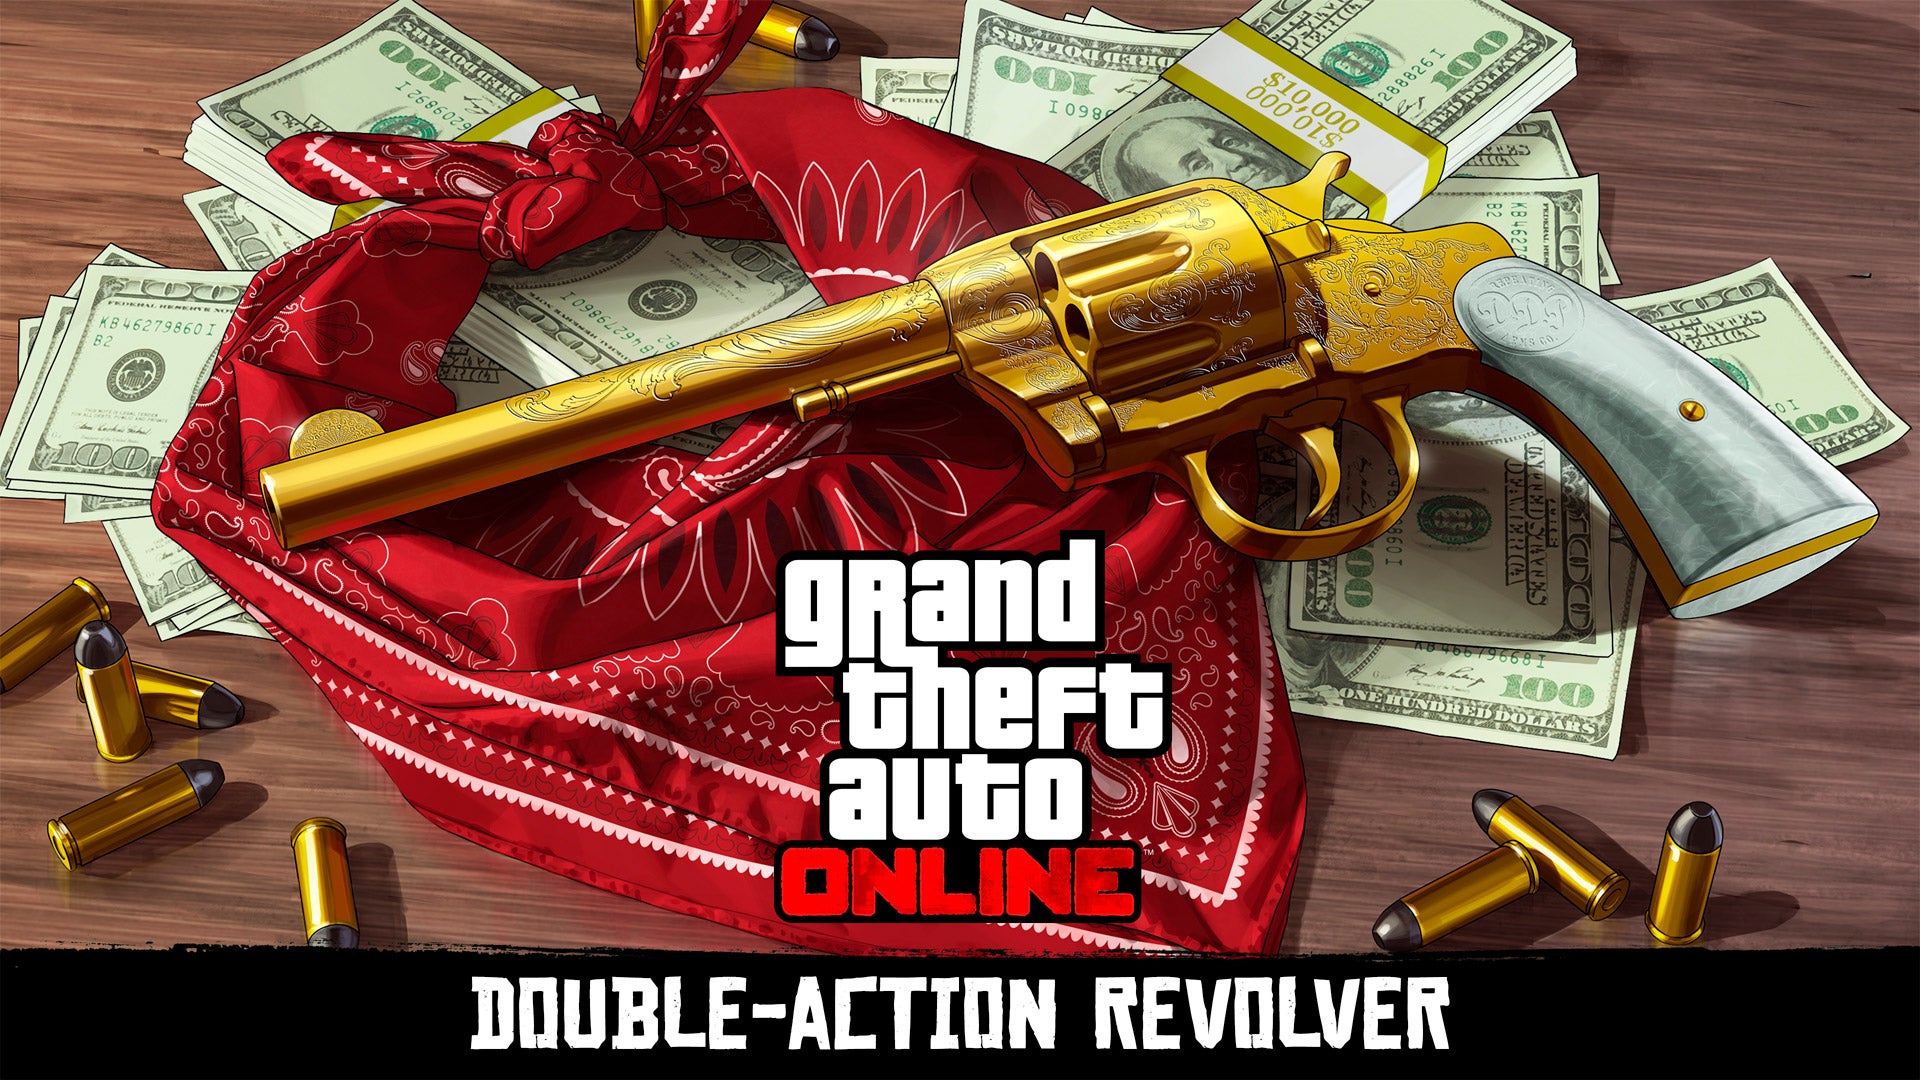 You can already unlock a gun in Red Dead Redemption 2 by playing GTA Online Eurogamer